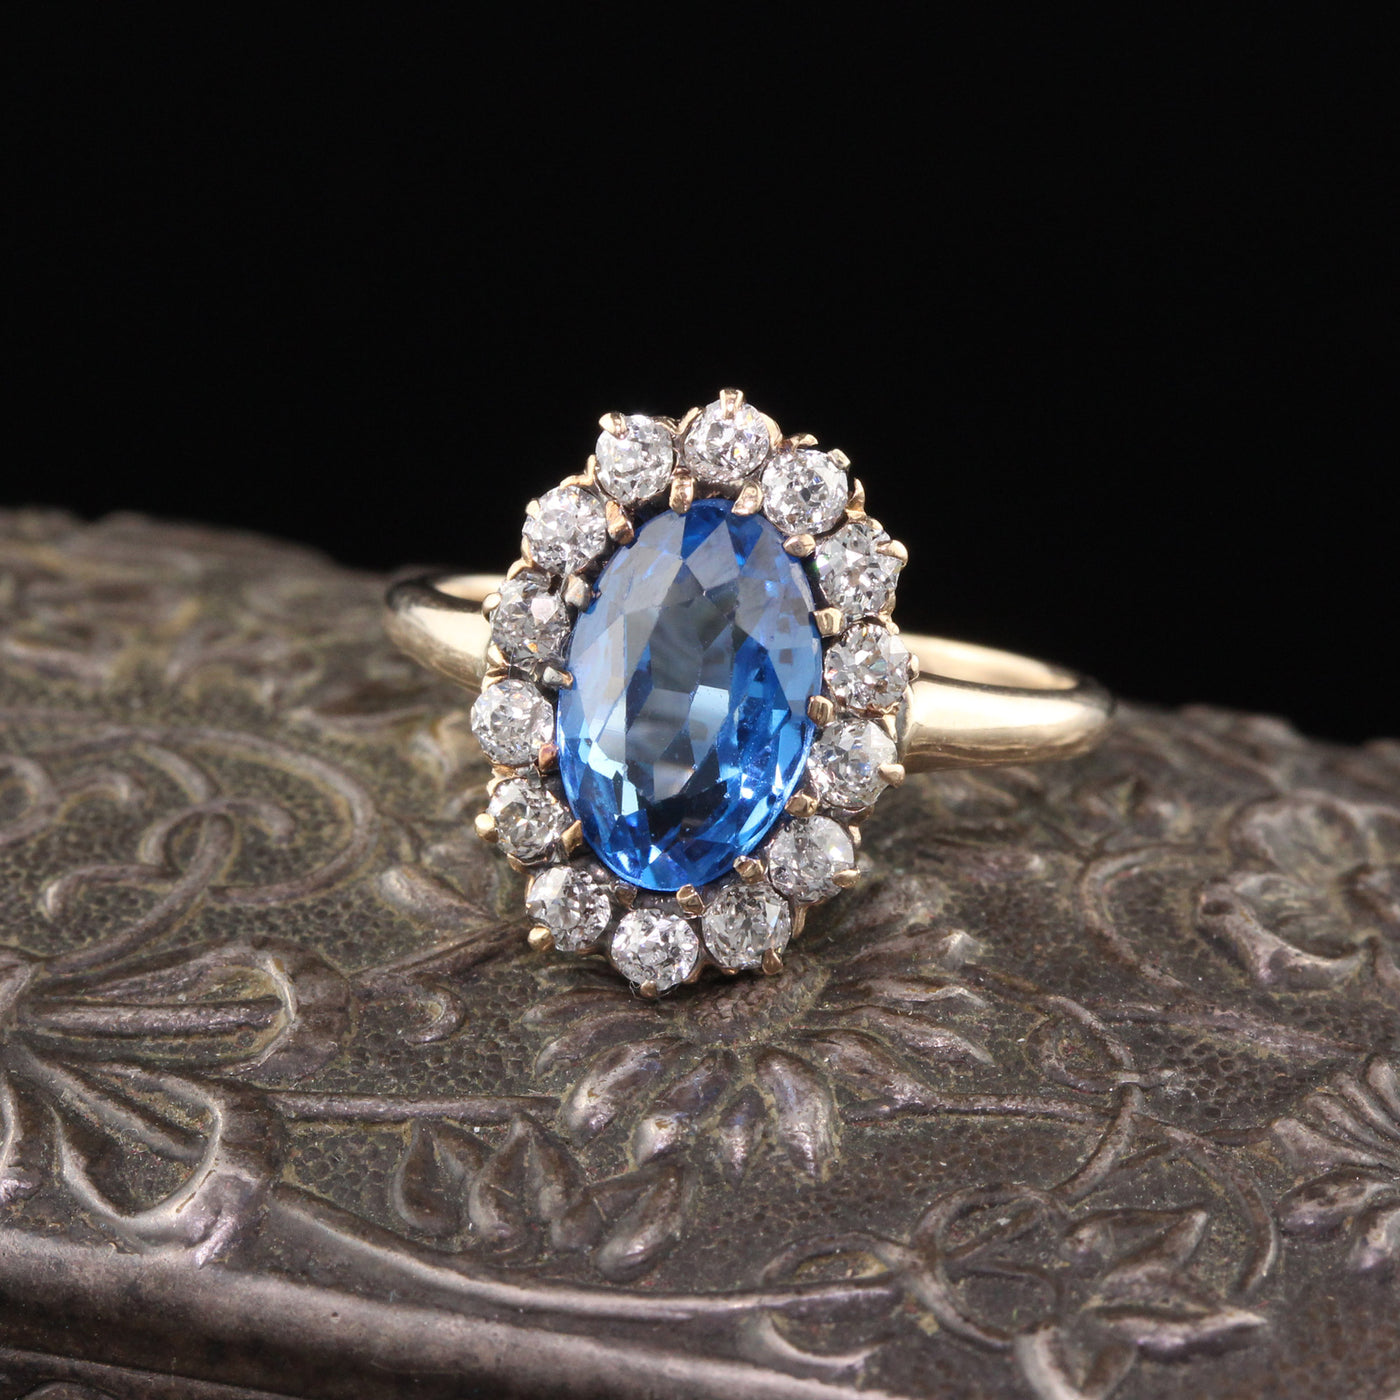 Antique Victorian 14K Yellow Gold Blue Spinel & Diamond Cluster Ring - The Antique Parlour